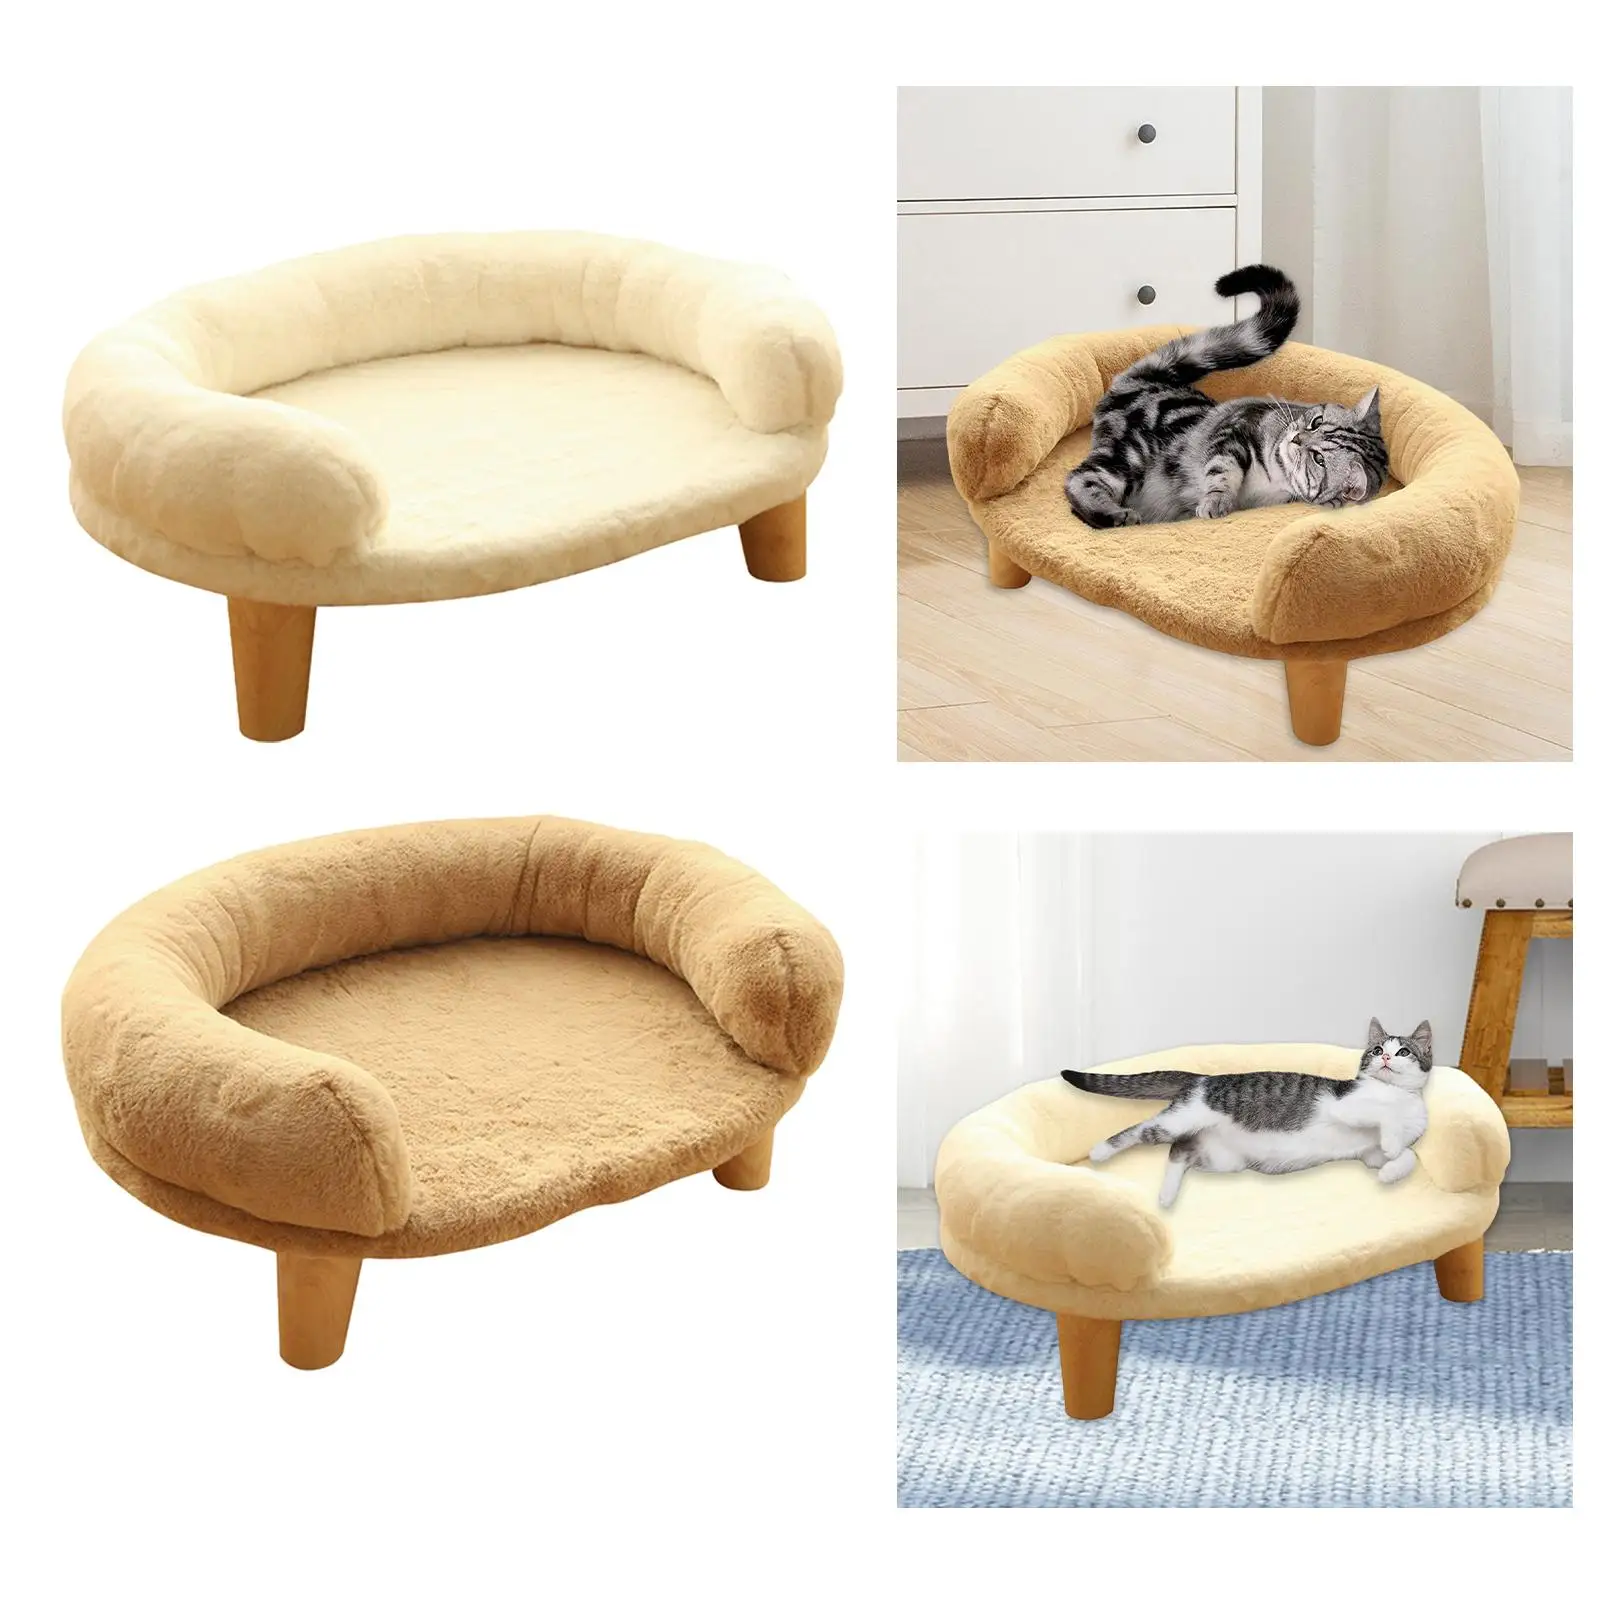 Soft Pet Bed Blanket House Nonslip Leg Self Warming Hut Nest Cats Warm Couch for Kitty Sleeping Small Medium Dog Calming Rabbits